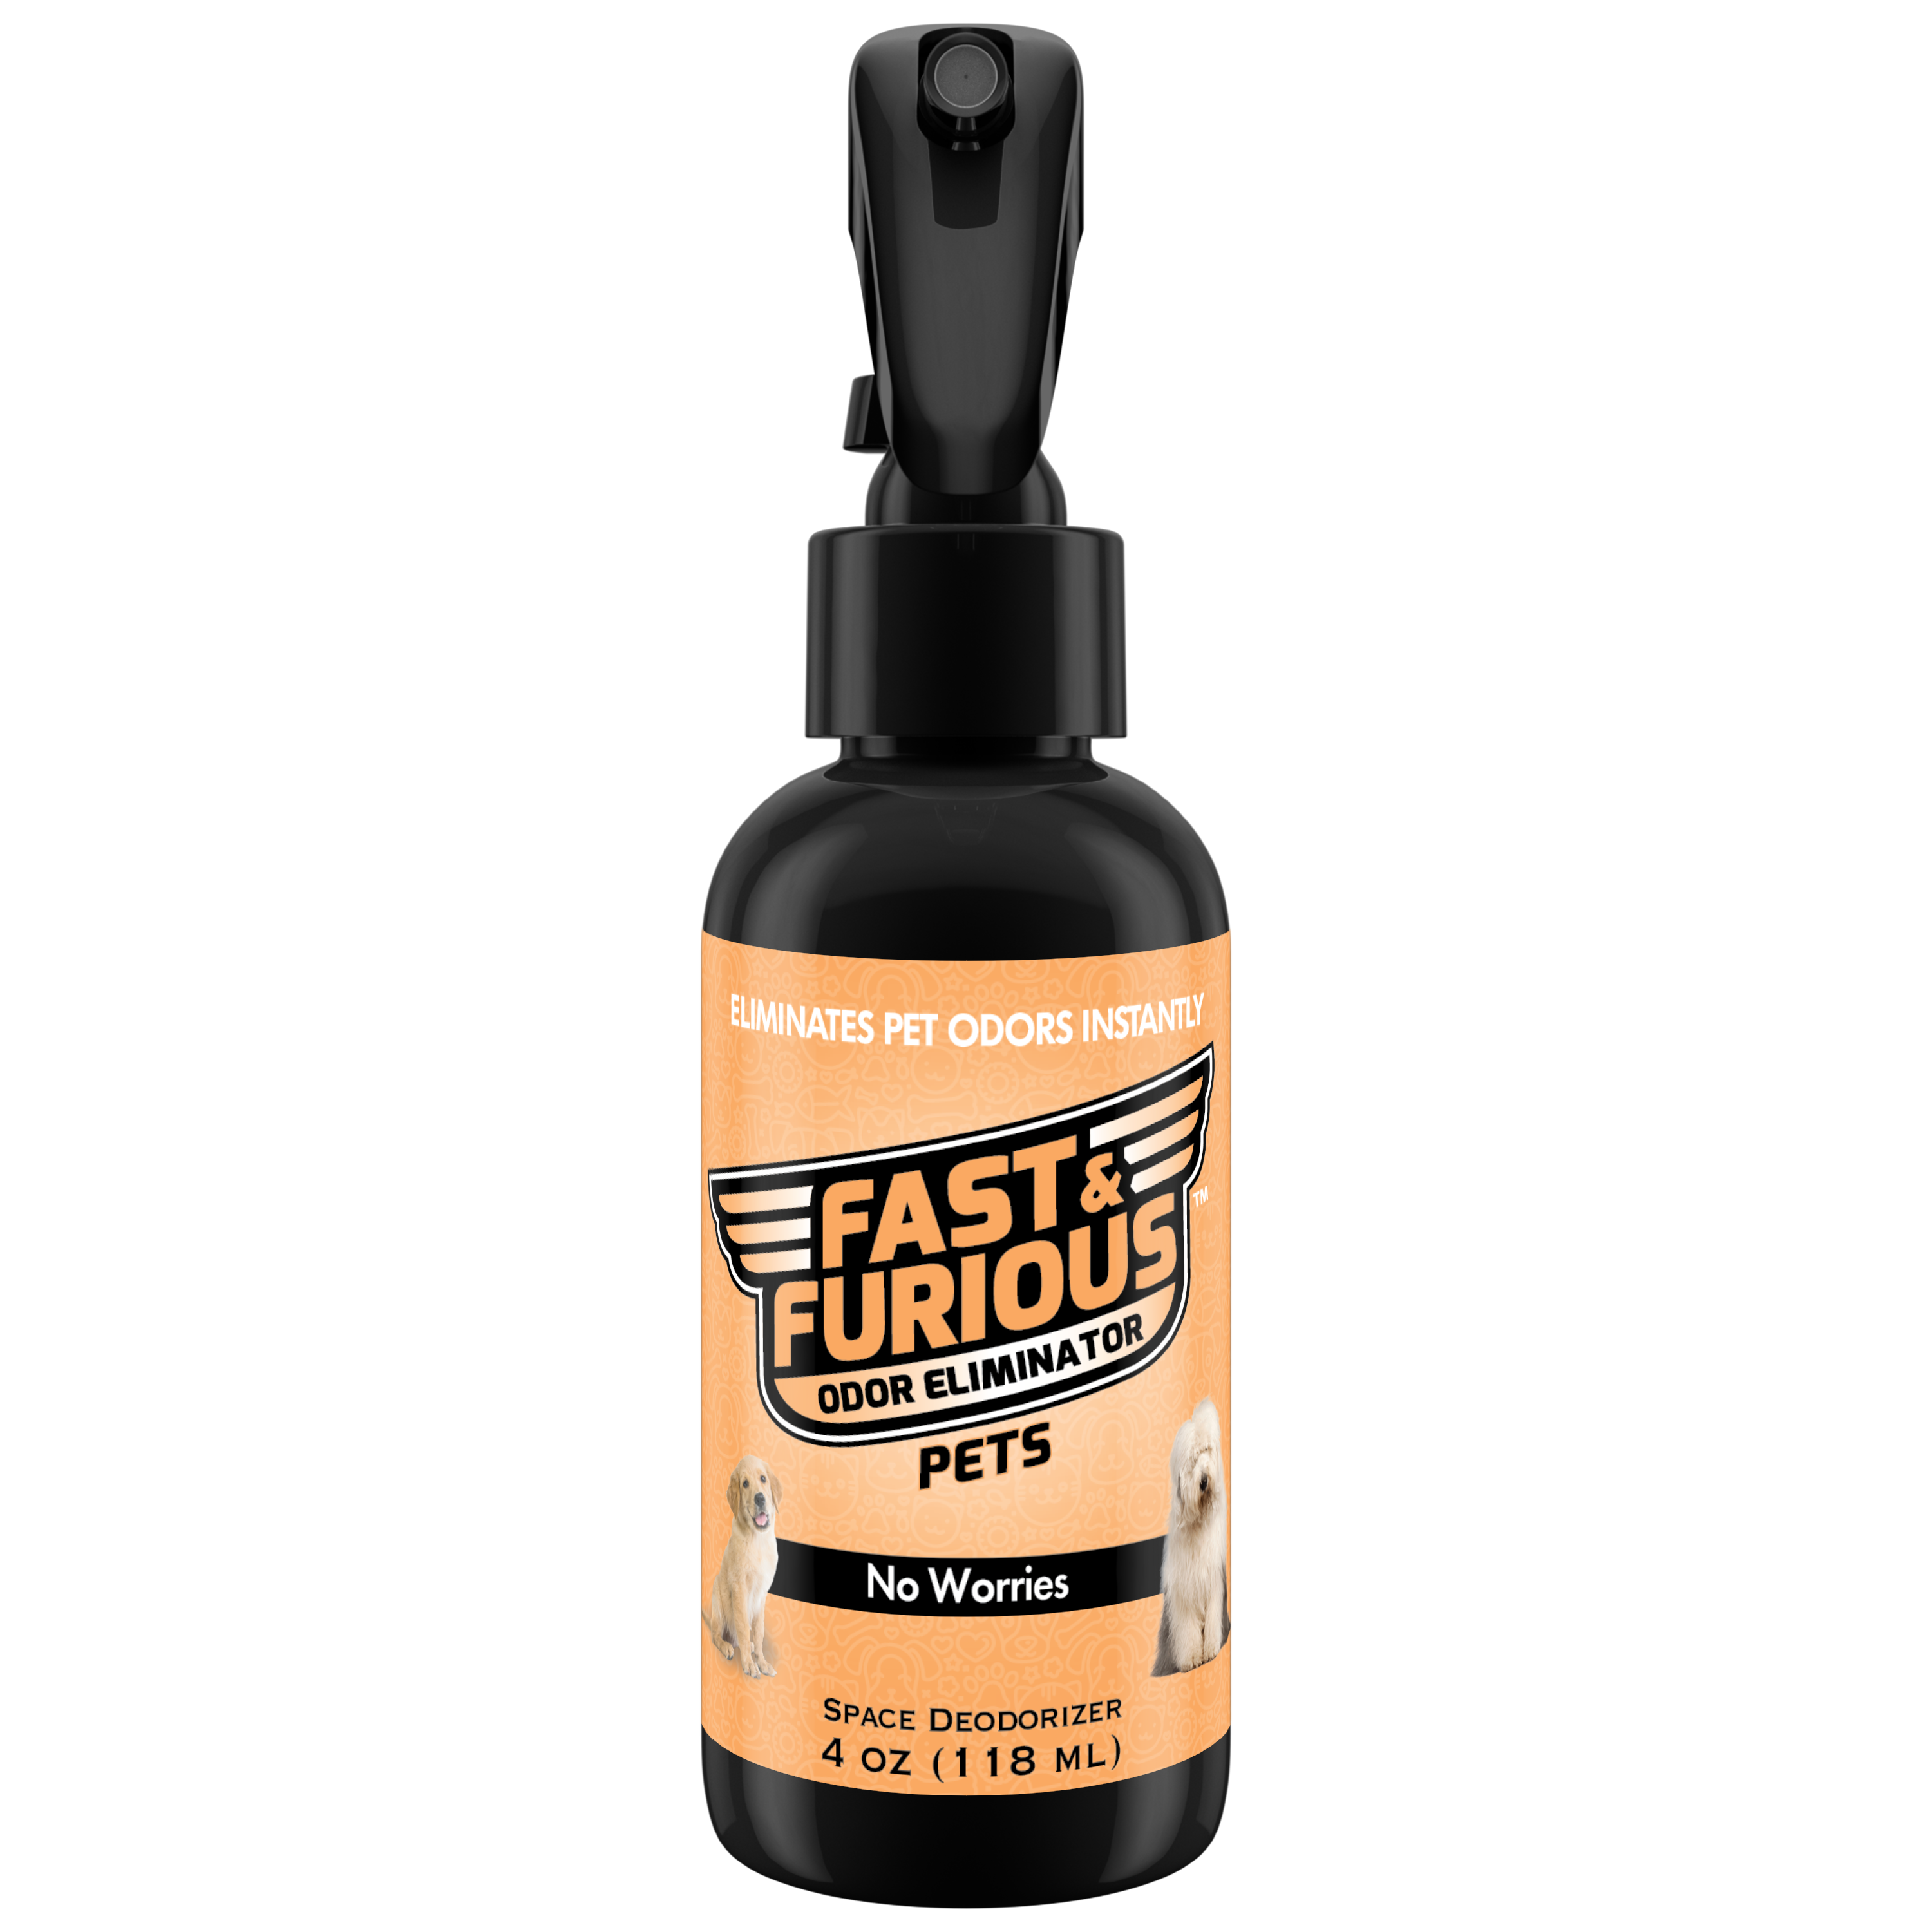 Fast and Furious Pets Odor Eliminator - No Worries Scent